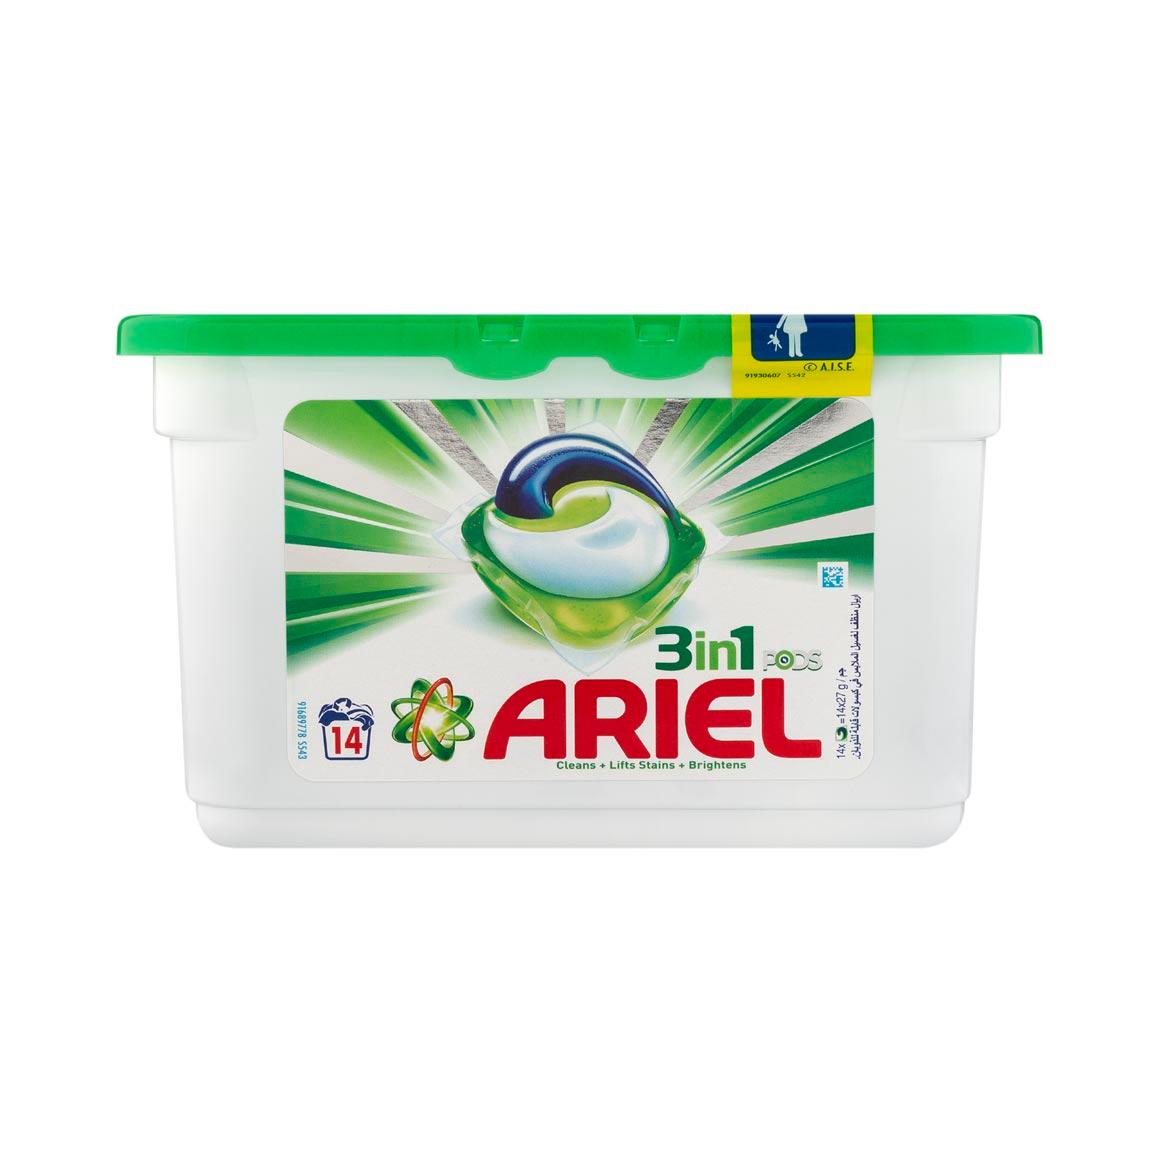 Ariel Original All in 1 Pods 3x15 - Nomm Company Limited